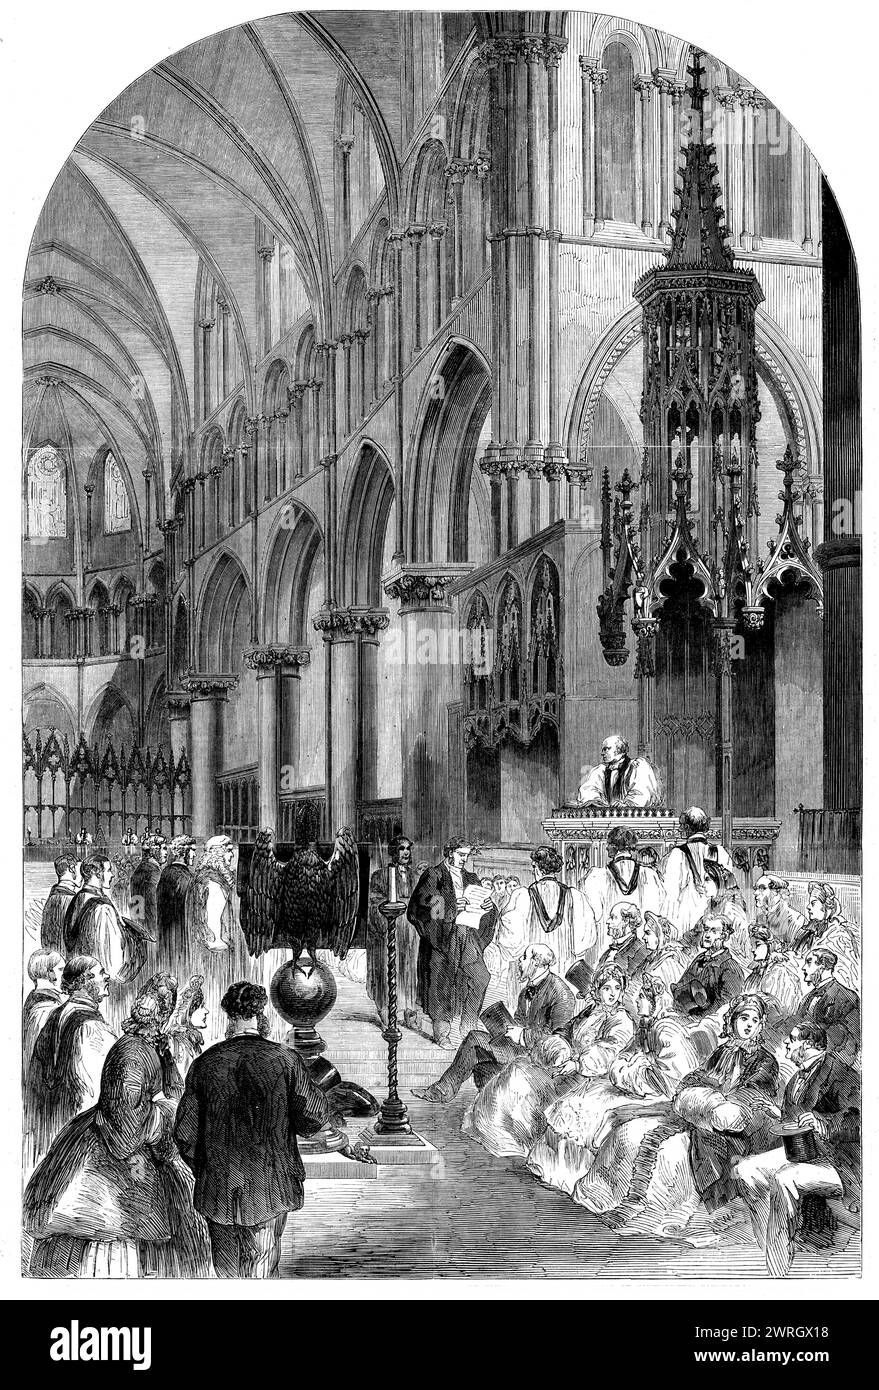 Enthronisation of the Most Rev. Dr. Charles Thomas Longley, Lord Archbishop of Canterbury, in the choir of Canterbury Cathedral, 1862. 'At the end of the first lesson Archdeacon Harrison went down from his stall and conducted the Archbishop to the throne, in which he caused him to sit, and formally inducted him into the archbishopric, reading the induction as follows: &quot;I, Benjamin Harrison, acting as deputy for James Croft, Master of Arts, Archdeacon of Canterbury, do induct, install, and enthrone you, the Most Reverend Father in God, Charles Thomas Longley, Doctor in Divinity, Lord Archb Stock Photo